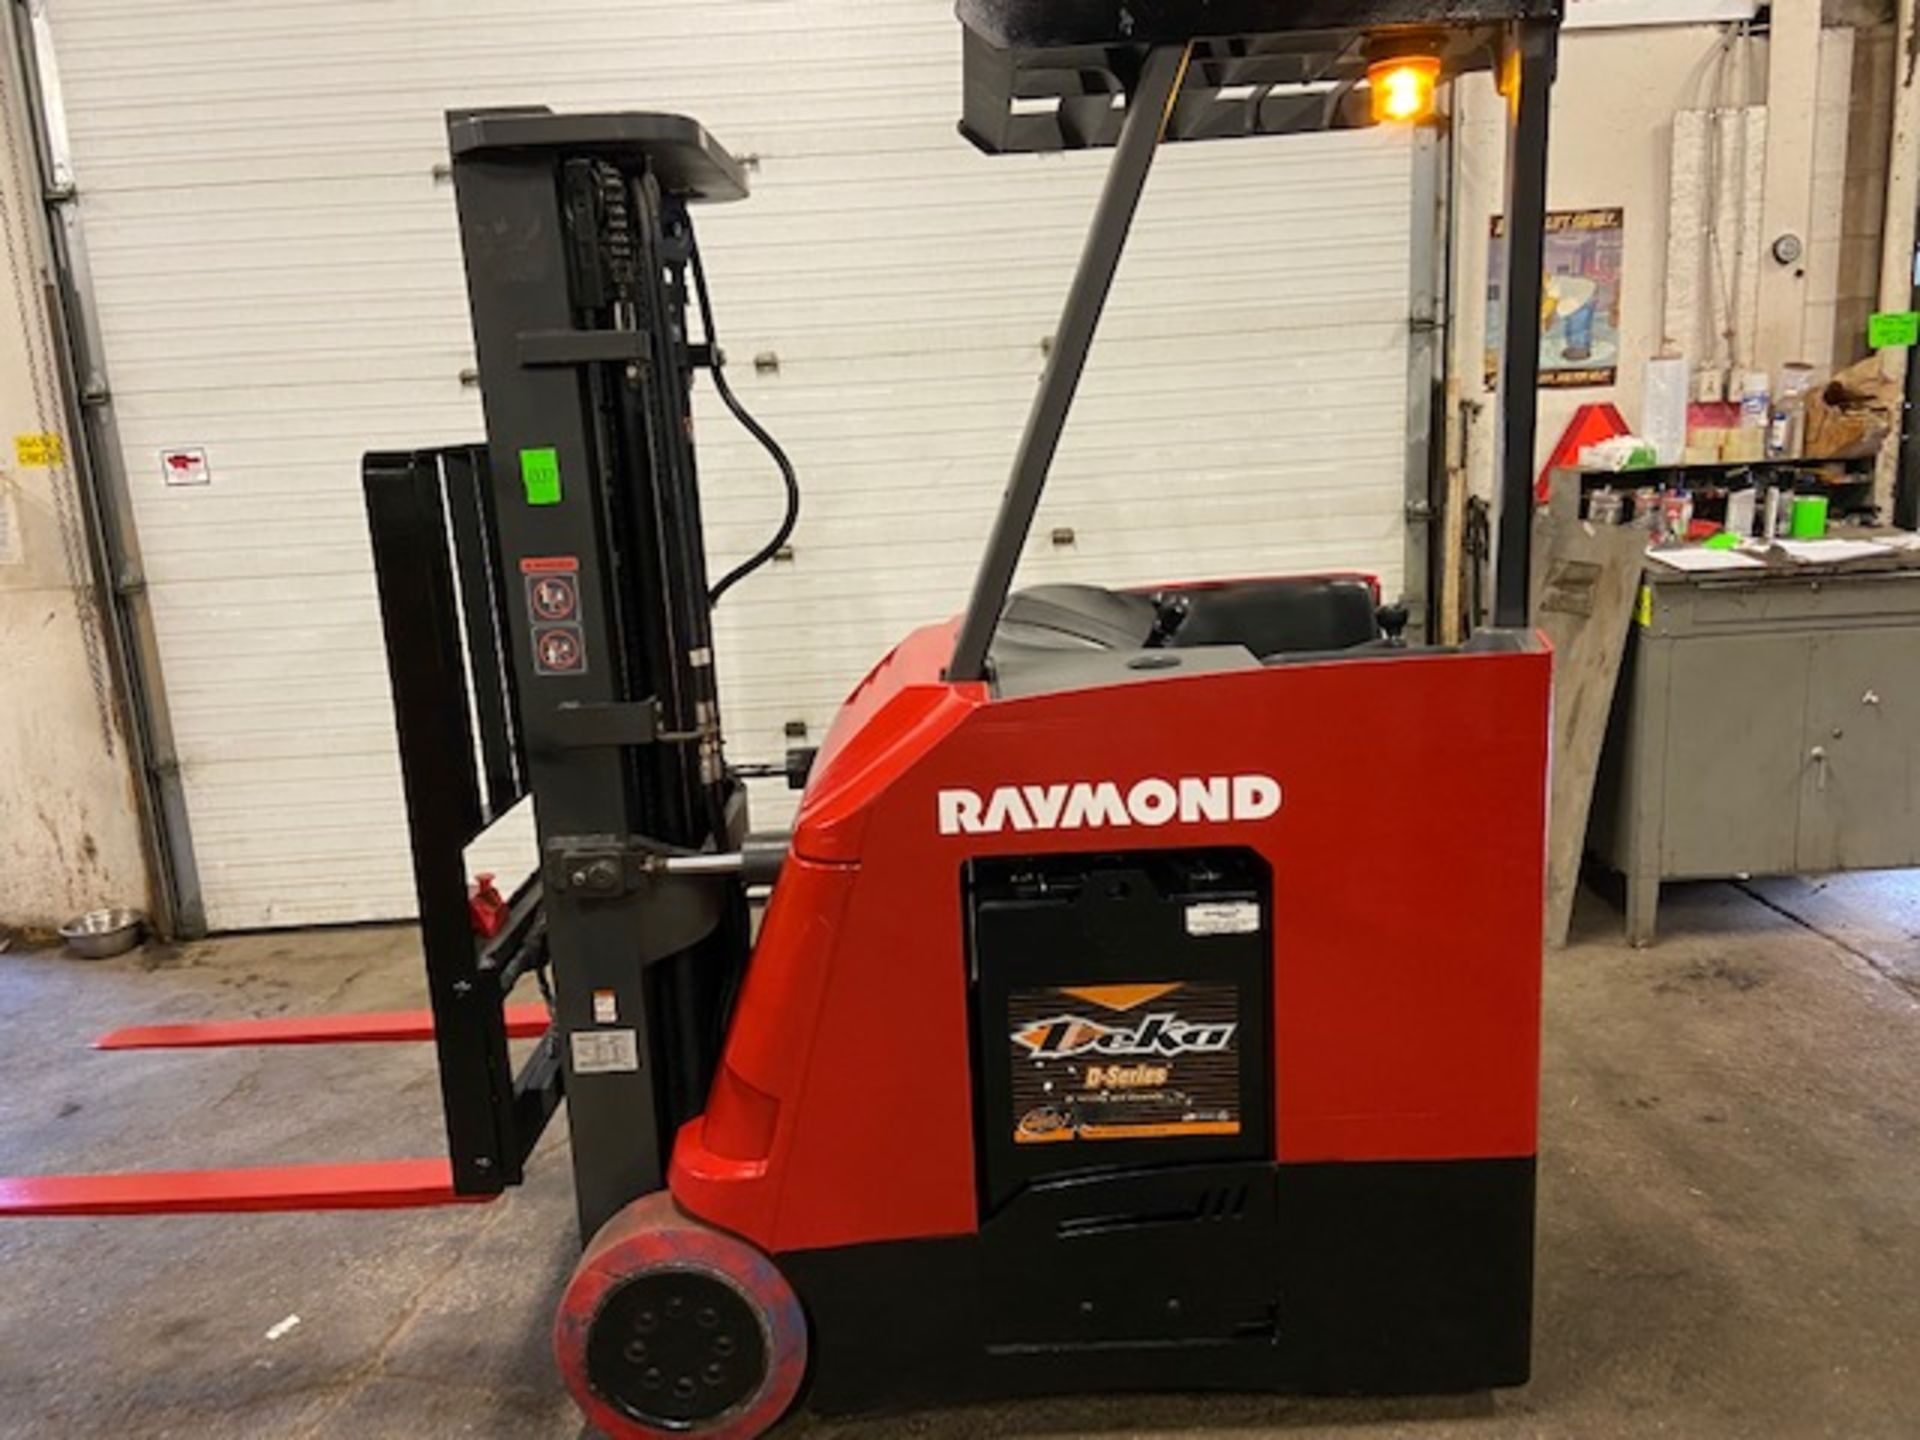 FREE CUSTOMS - 2015 Raymond 5000lbs Capacity Stand On Forklift Electric with 3-STAGE MAST sideshift